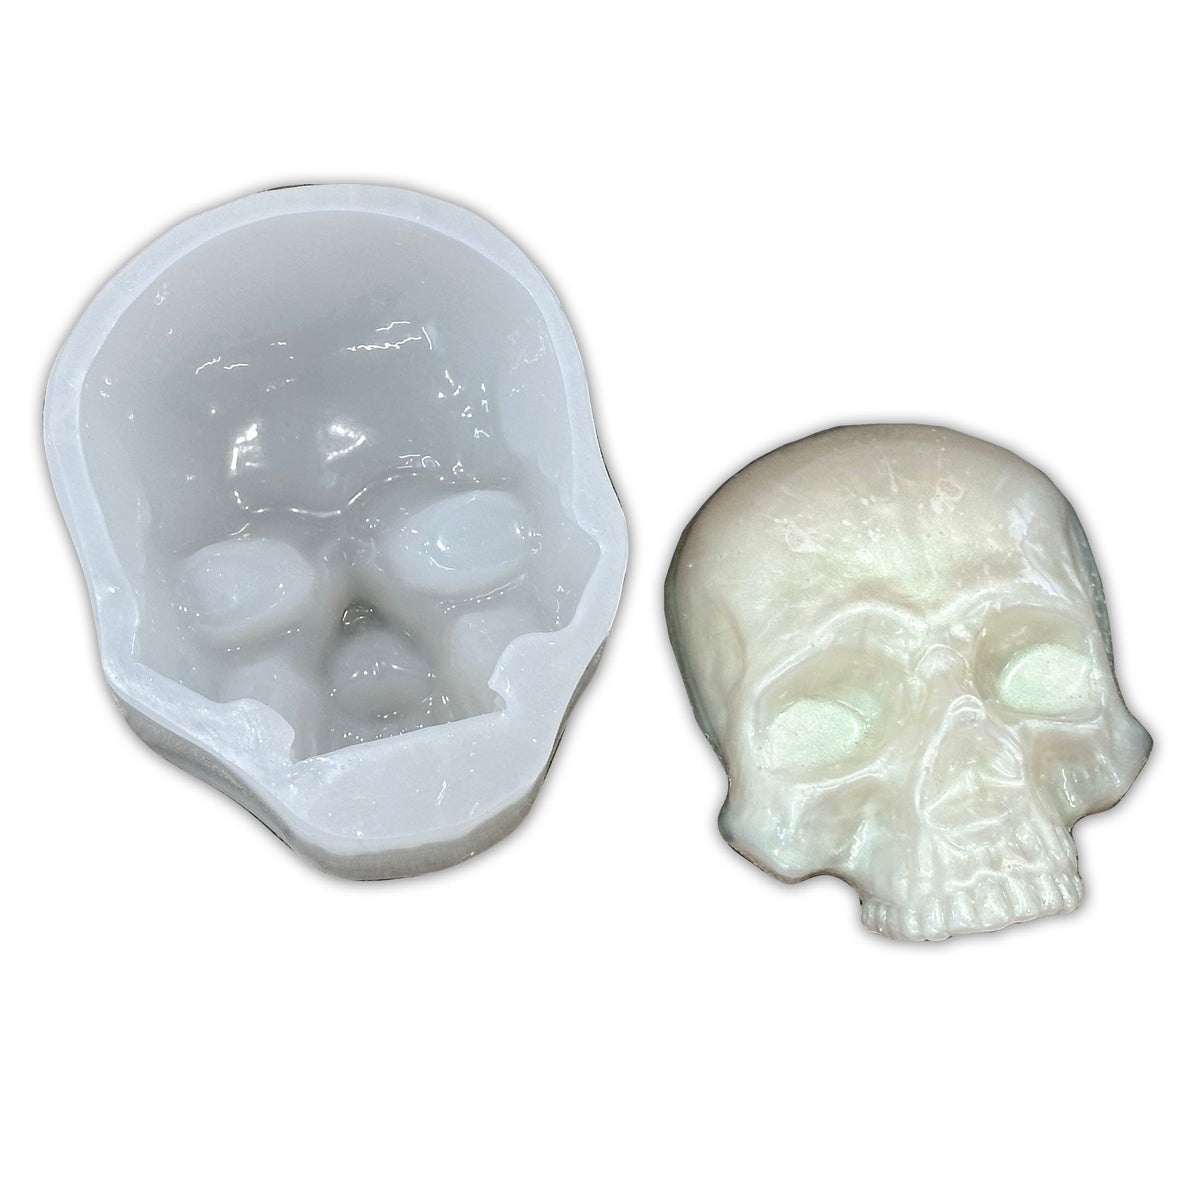 6.9x5.2x2.4 3D Partial Skull Silicone Mold – Crafted Elements